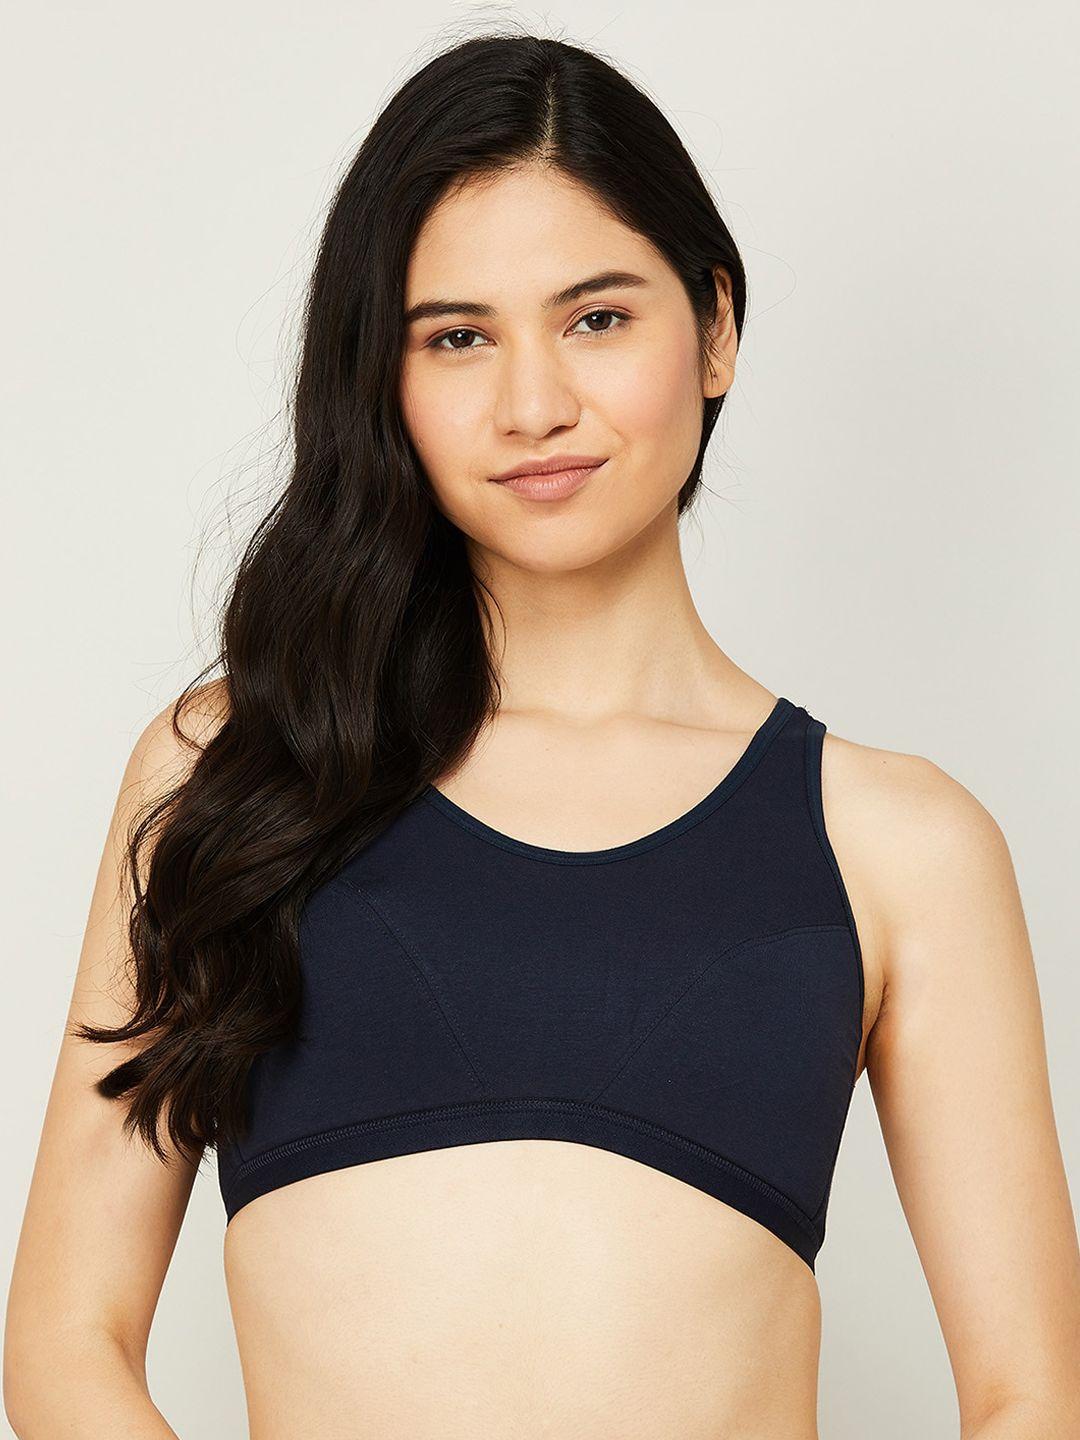 ginger-by-lifestyle-navy-blue-bra-underwired-lightly-padded